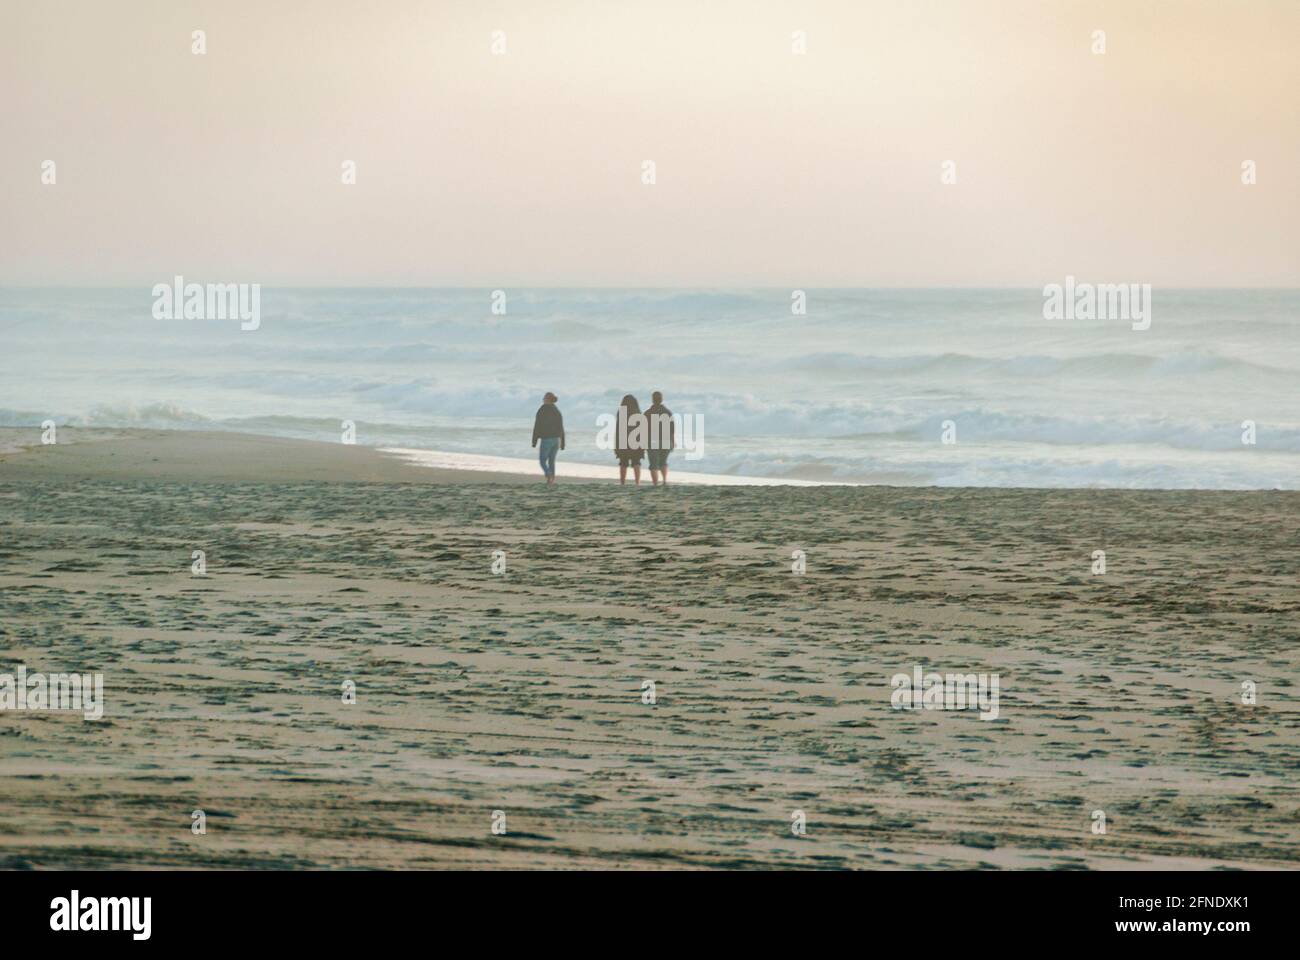 Three women share companionship while walking the beach on a foggy day in Oregon, USA. Stock Photo